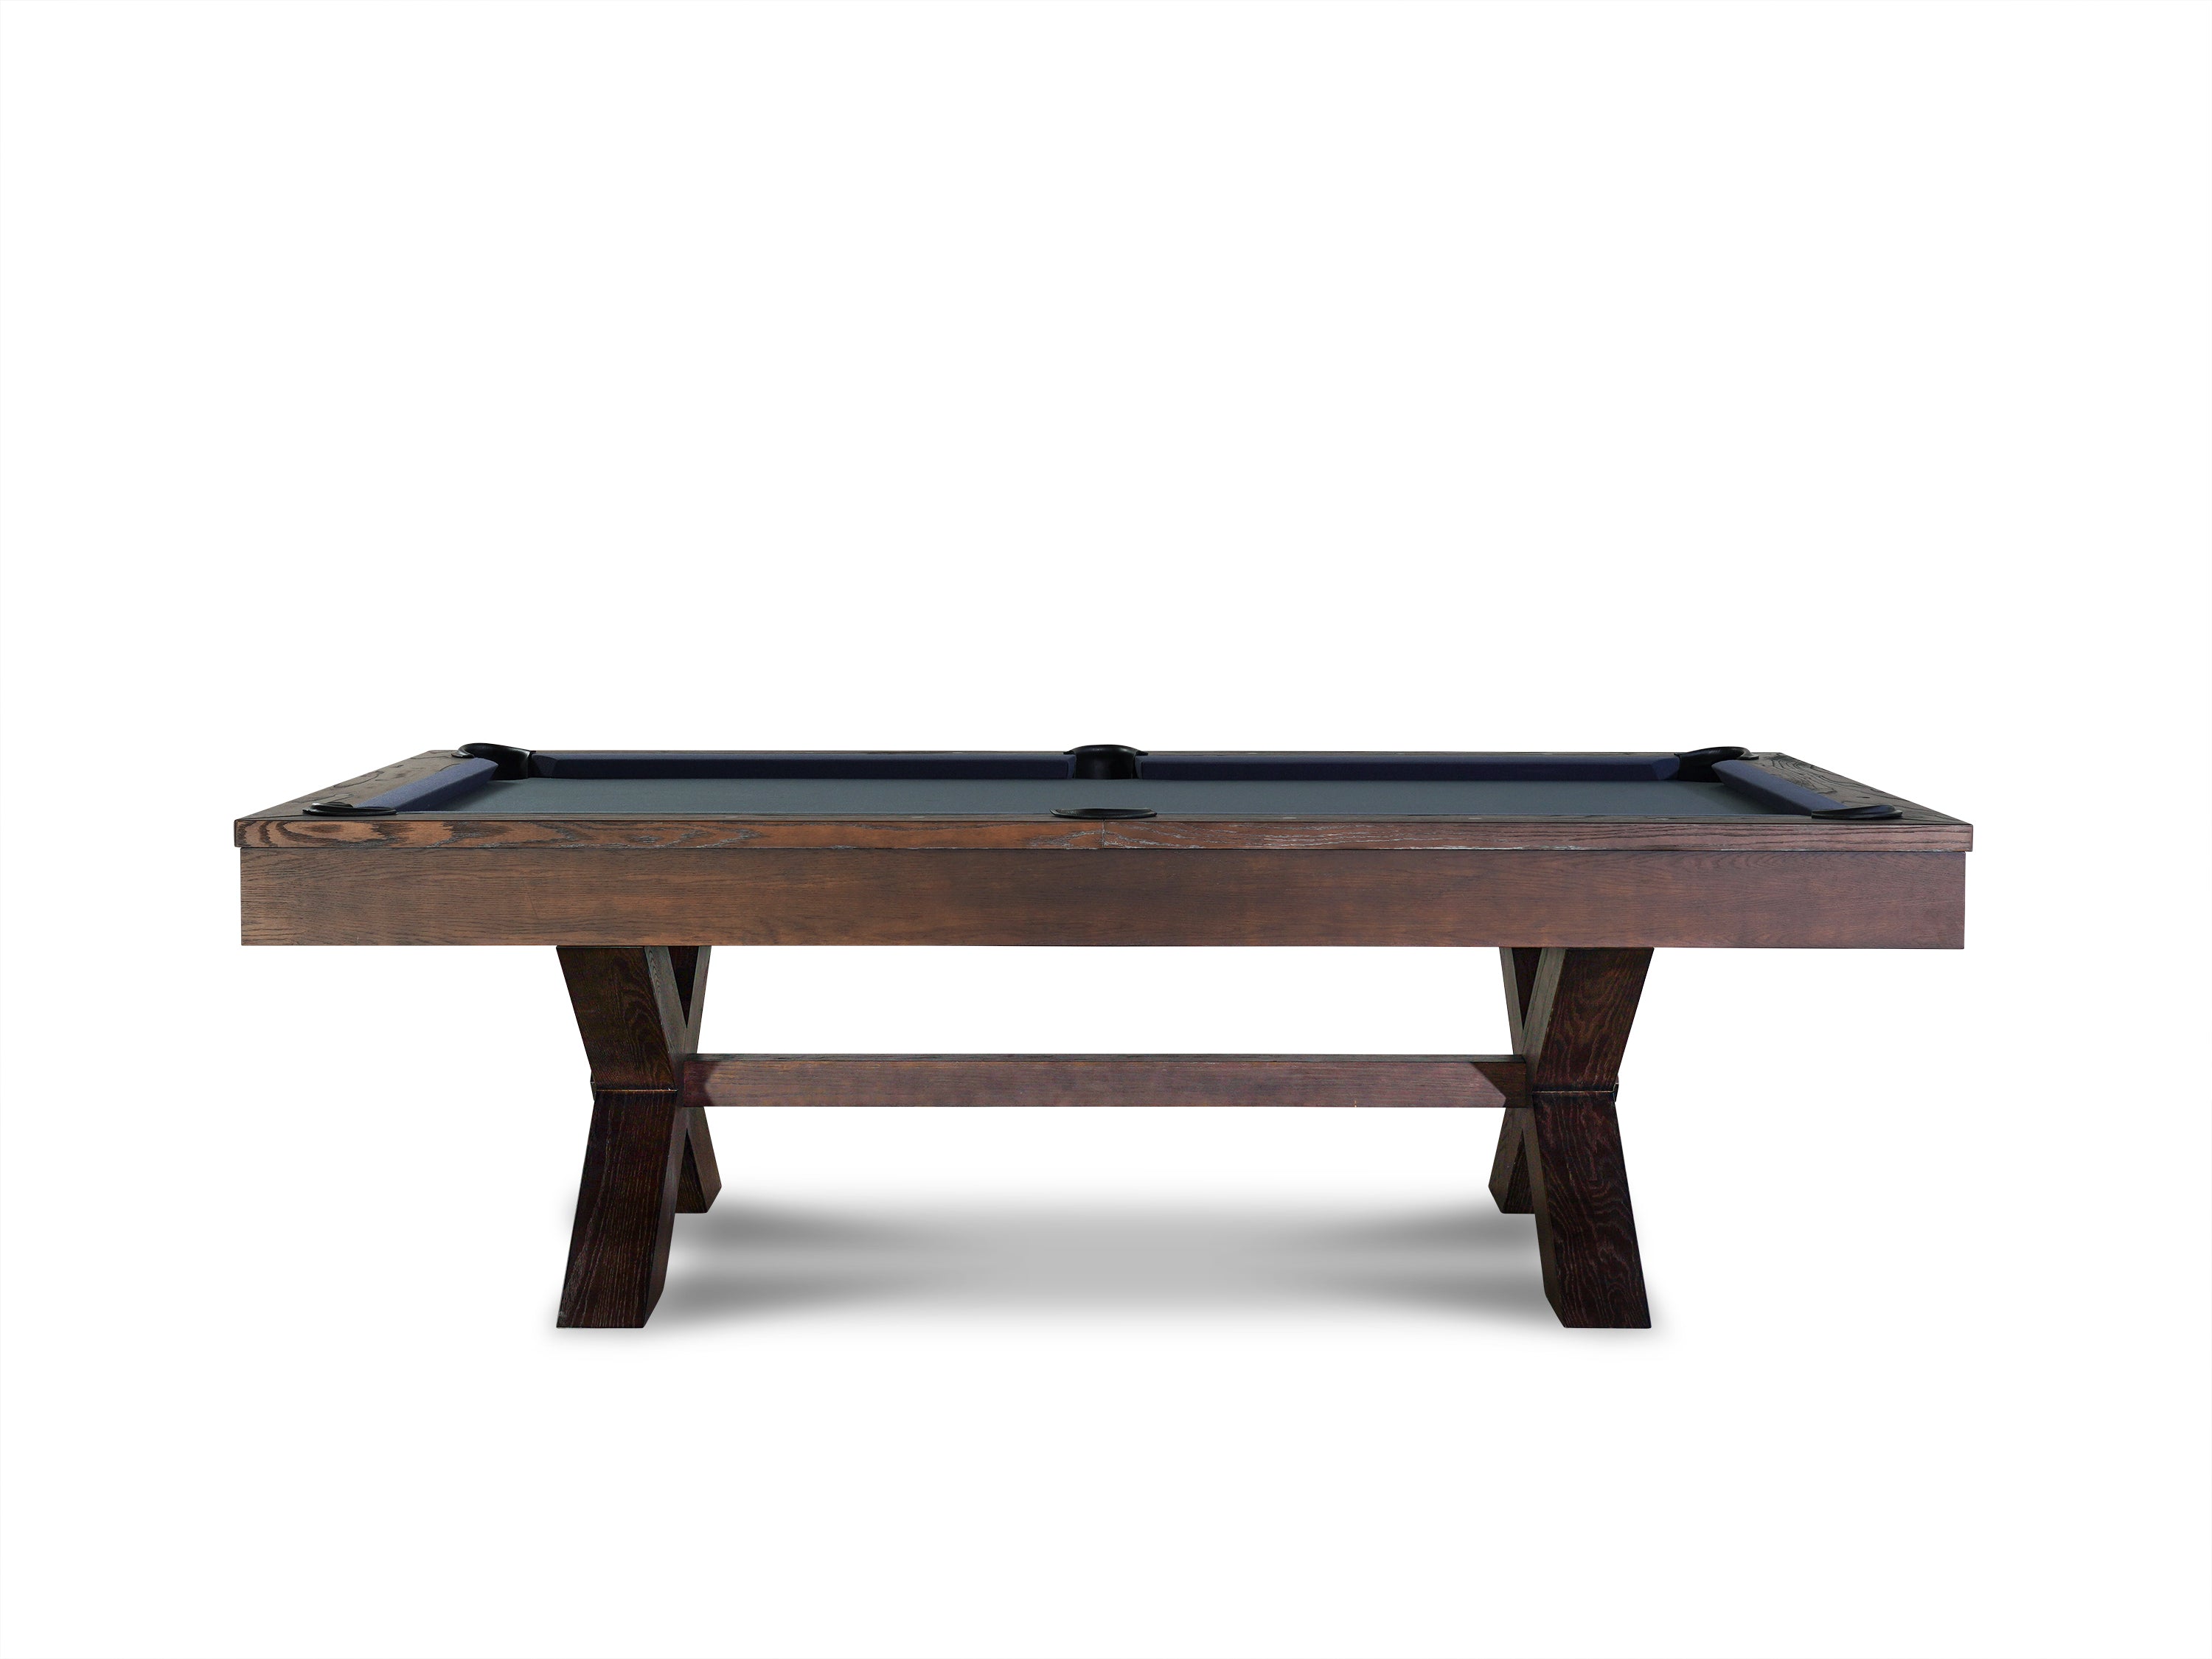 Isabella Manhattan Slate Pool Table In Brownwash |  Includes Premium Accessory Kit | Optional Dining Top